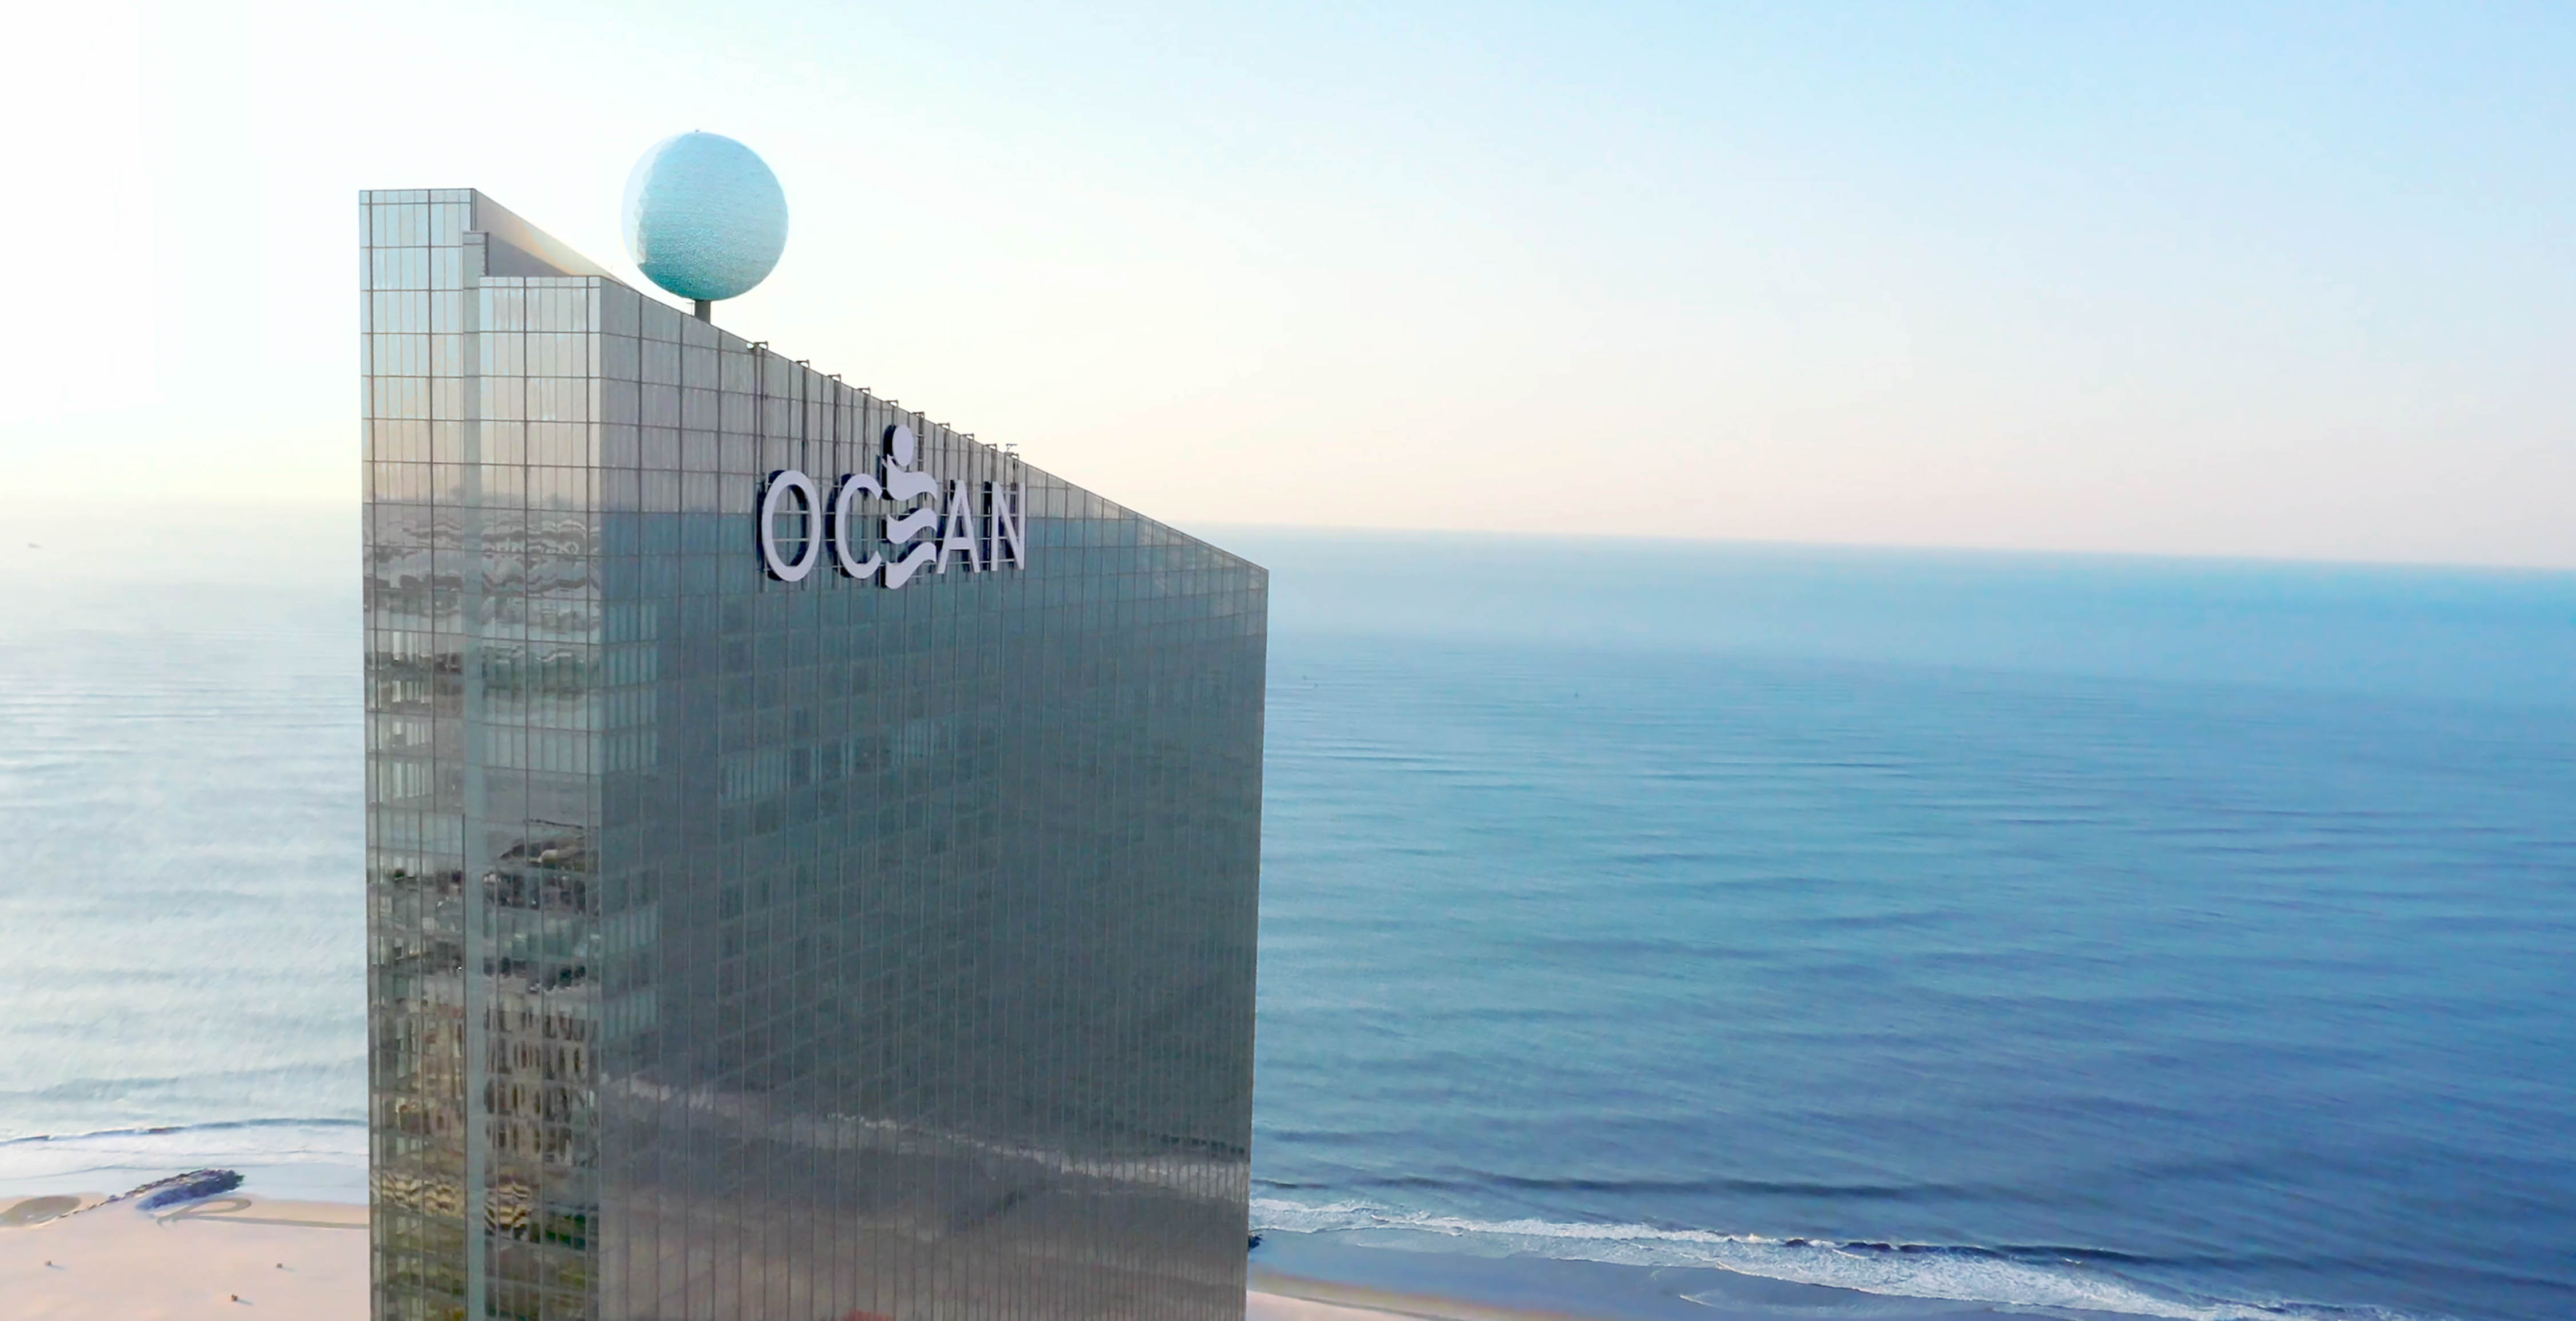 ADVANCE PURCHASE SPECIAL RATE - https://www.theoceanac.com/offers/advance-purchase-special-rate?utm_source=visitnj&utm_medium=deal&utm_campaign=ocean+casino+resort+advance+purchase+rate